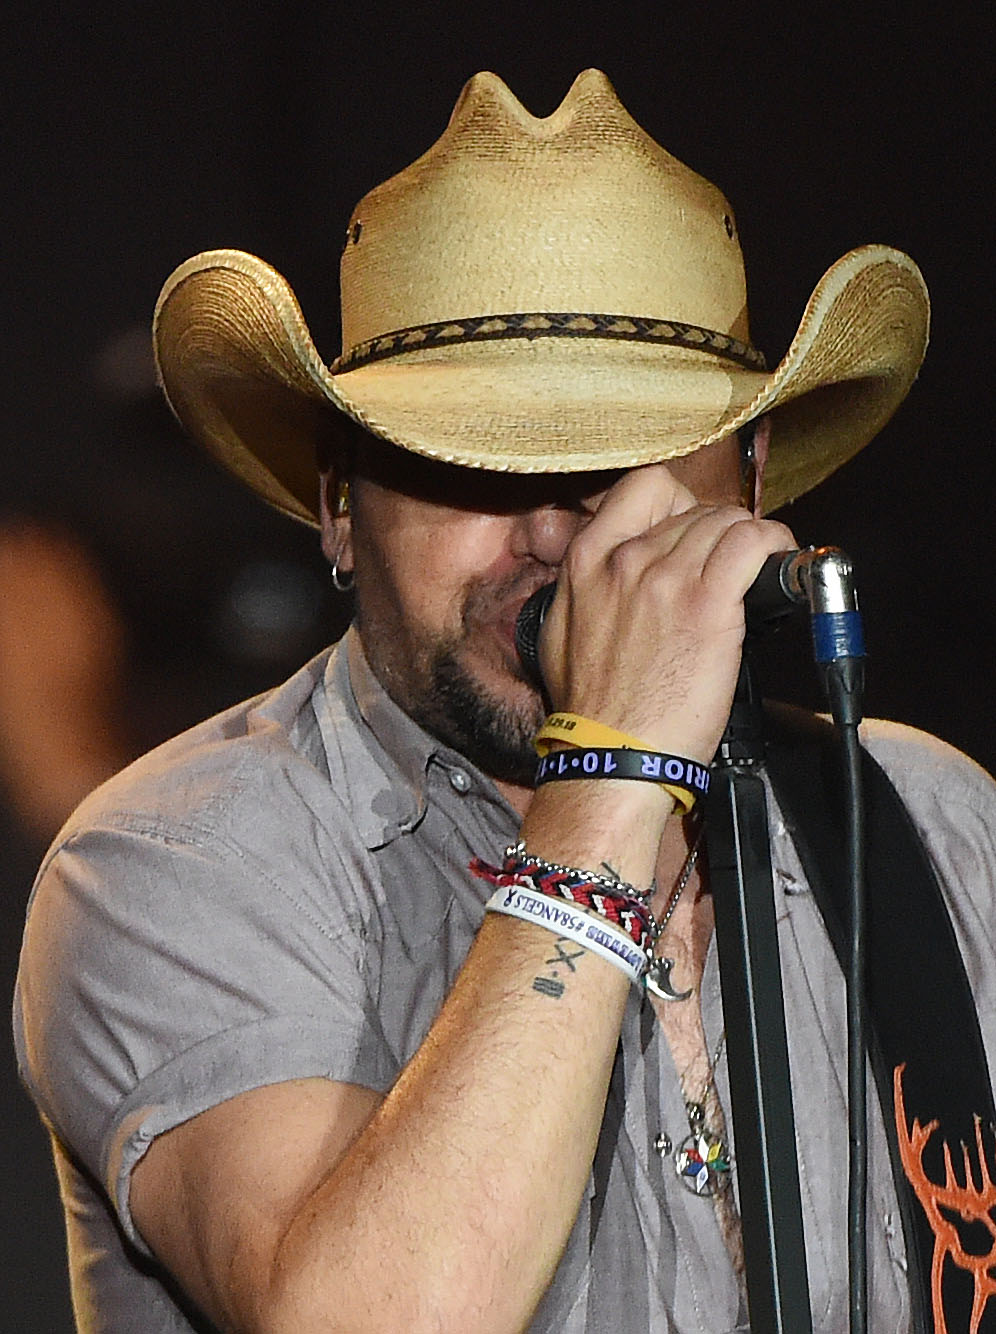  Country music artist Jason Aldean, with a wrist full of Route 91 wrist bands, performs the final show of his High Noon Neon Tour Saturday, September 29, 2018 at FivePoint Amphitheatre in Irvine. Approximately 500 Route 91 survivors attended the show